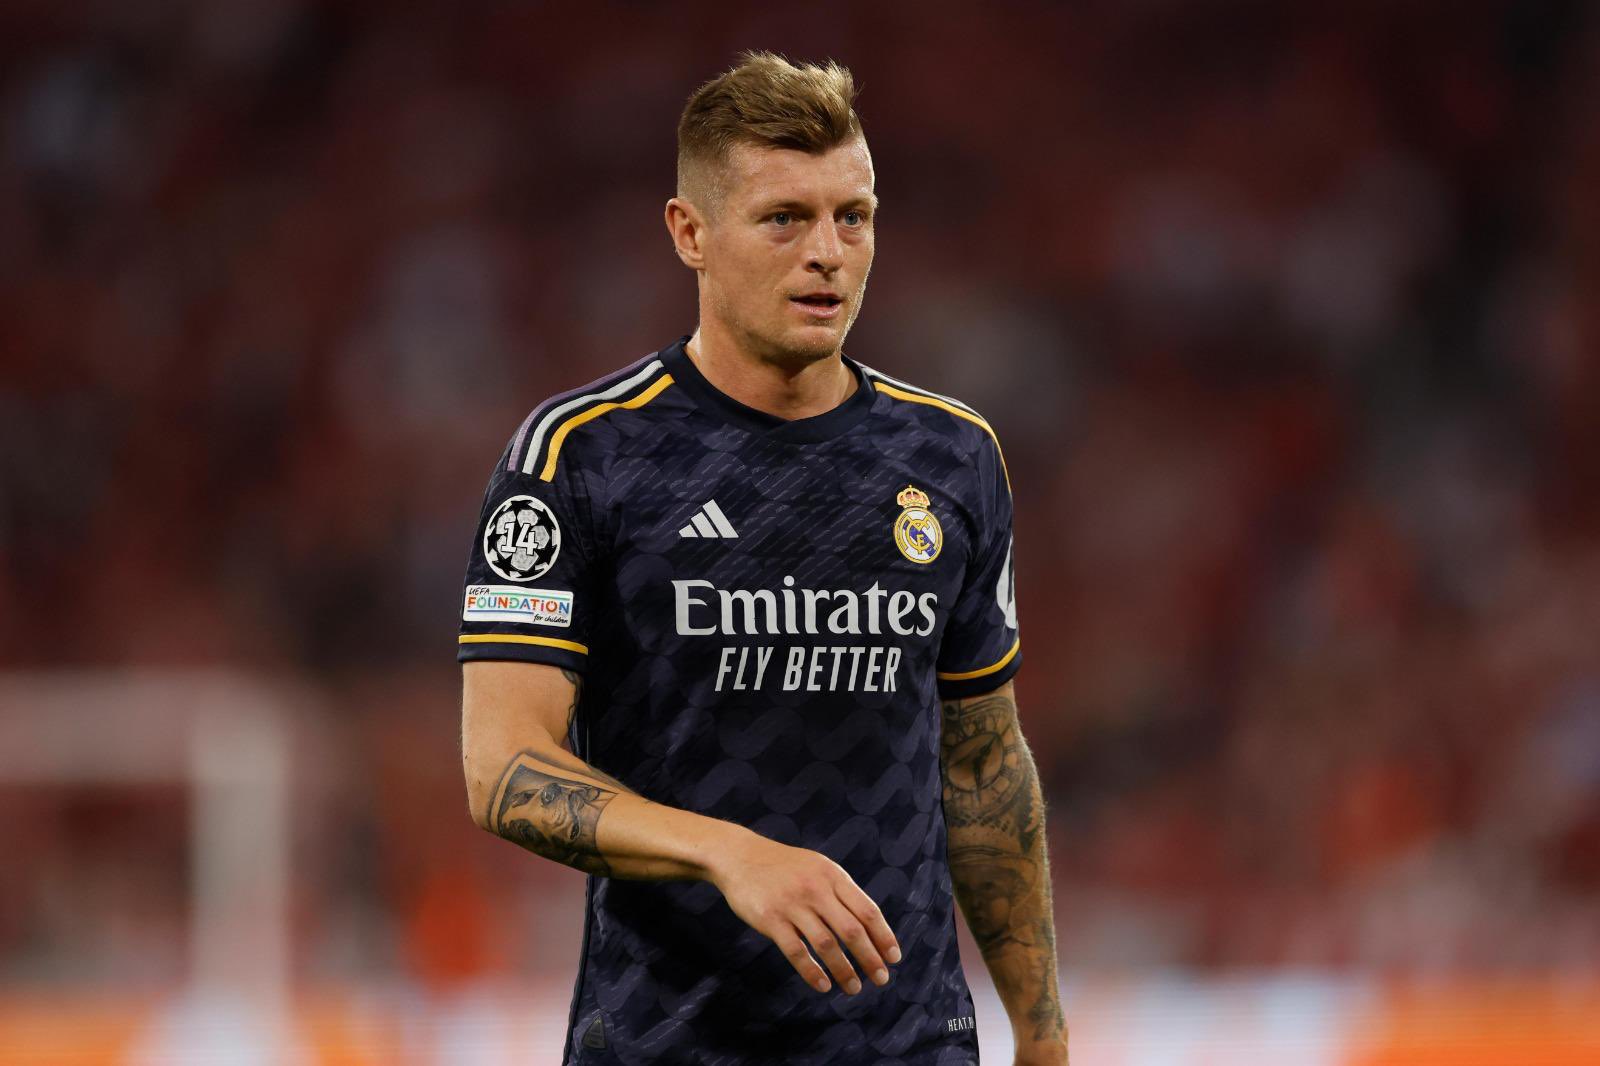 Toni Kroos provides enigmatic response to further questions on his Real Madrid future